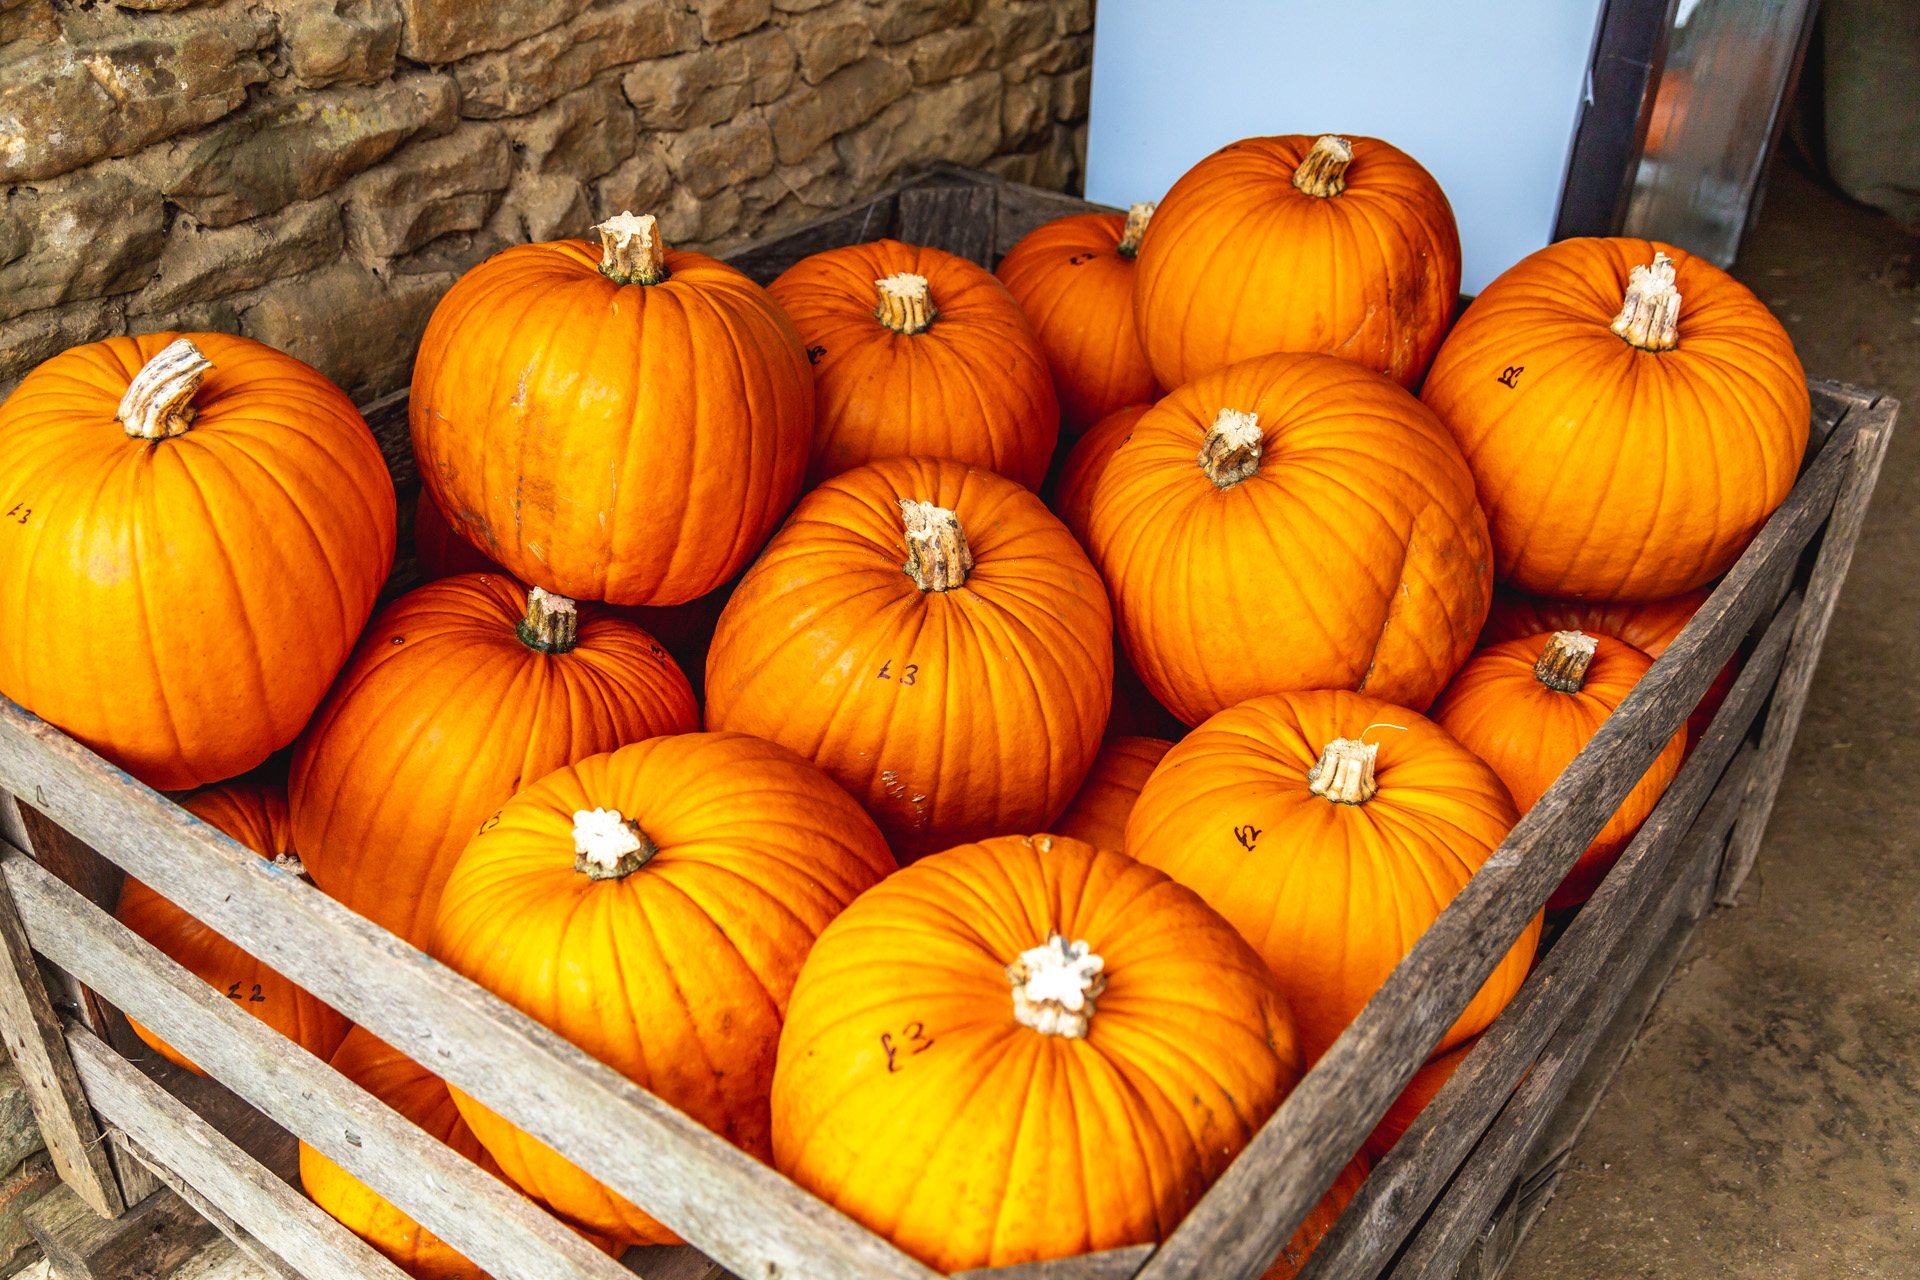 Vibrant orange harvested pumpkins in wood box for sale on country market in Oxford, United Kingdom